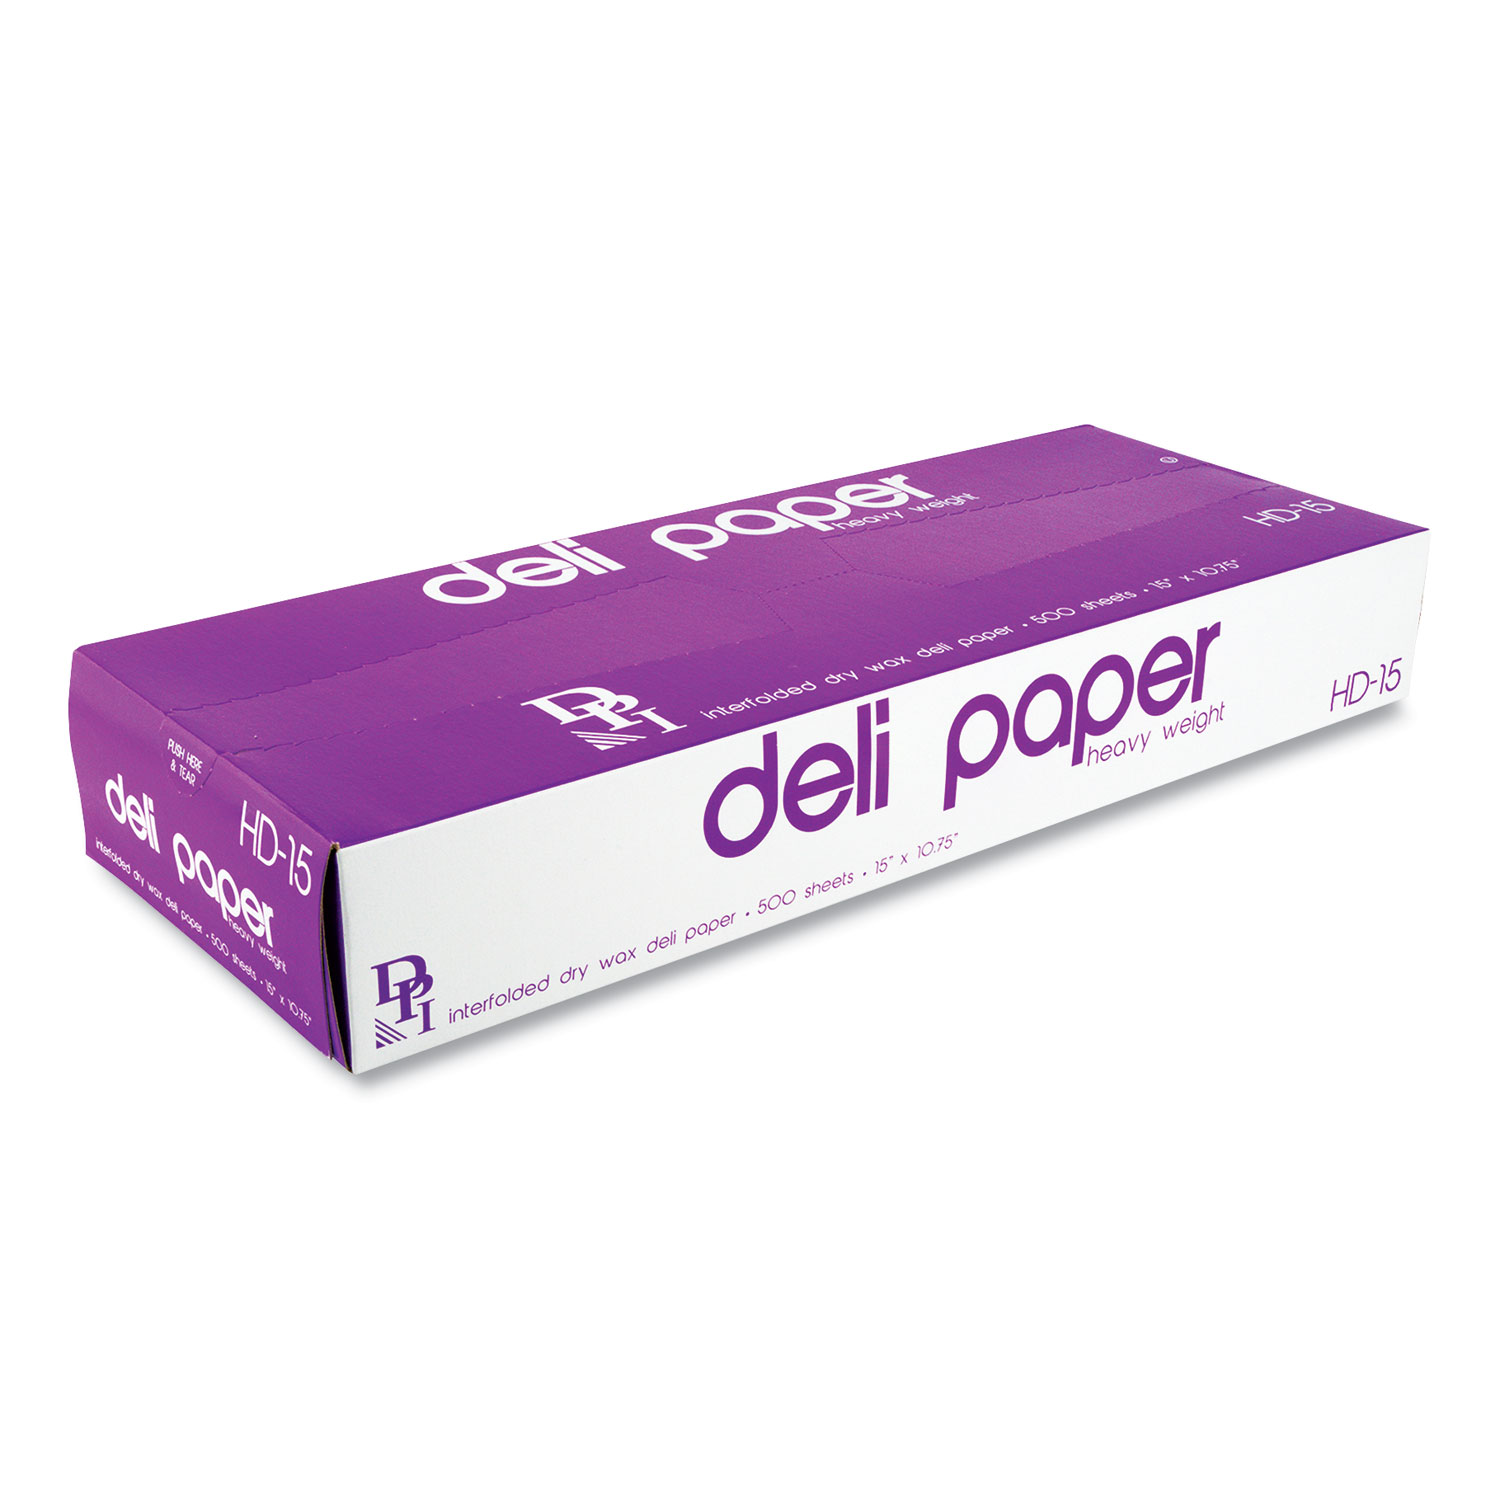 Durable Packaging Interfolded Deli Sheets, 10.75 x 15, 500 Sheets/Box, 12 Boxes/Carton